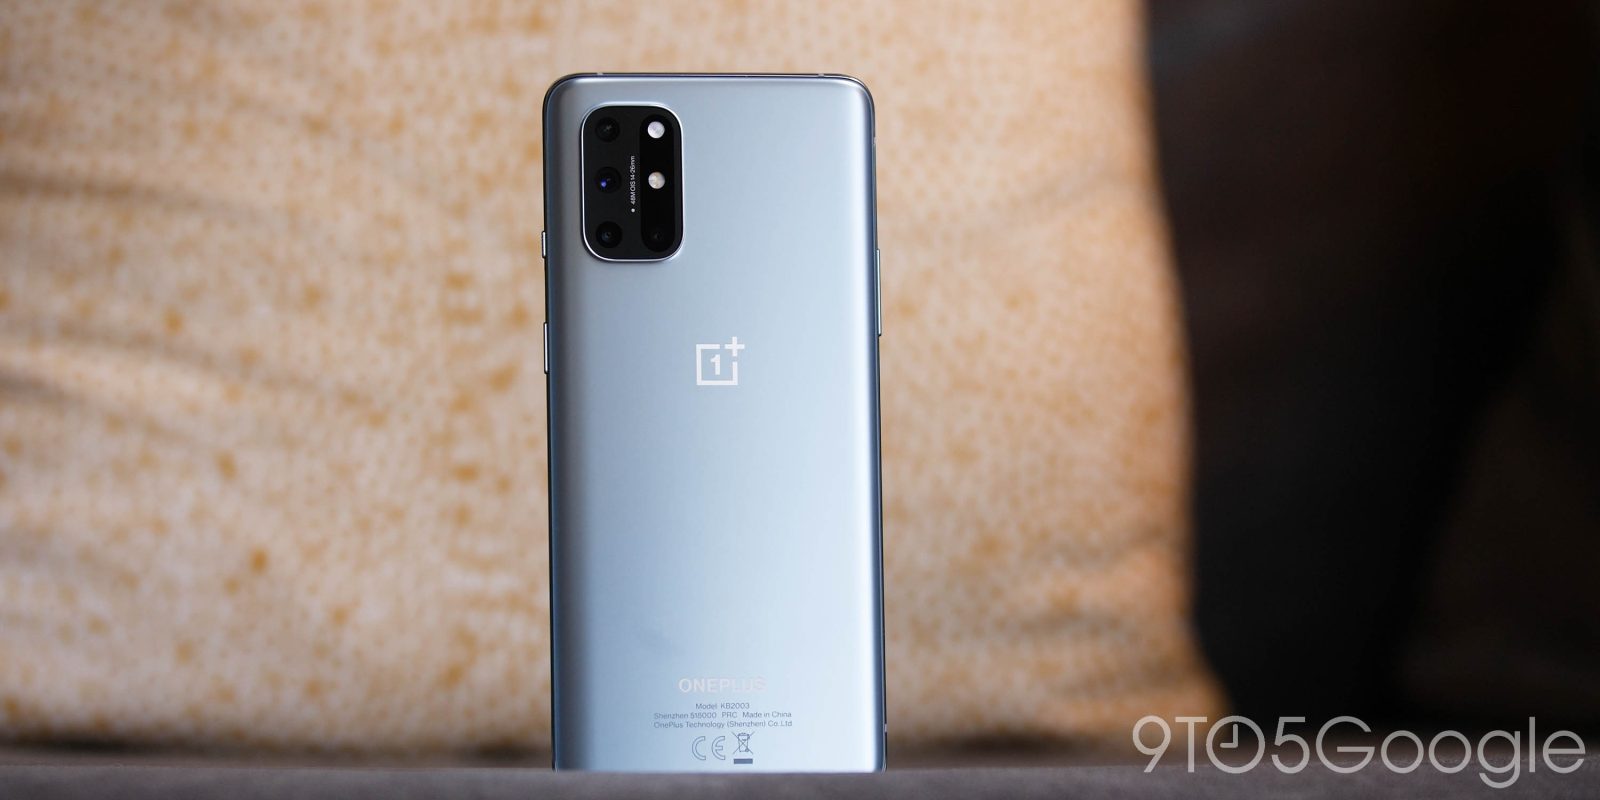 OxygenOS 11.0.6.7 for OnePlus 8T